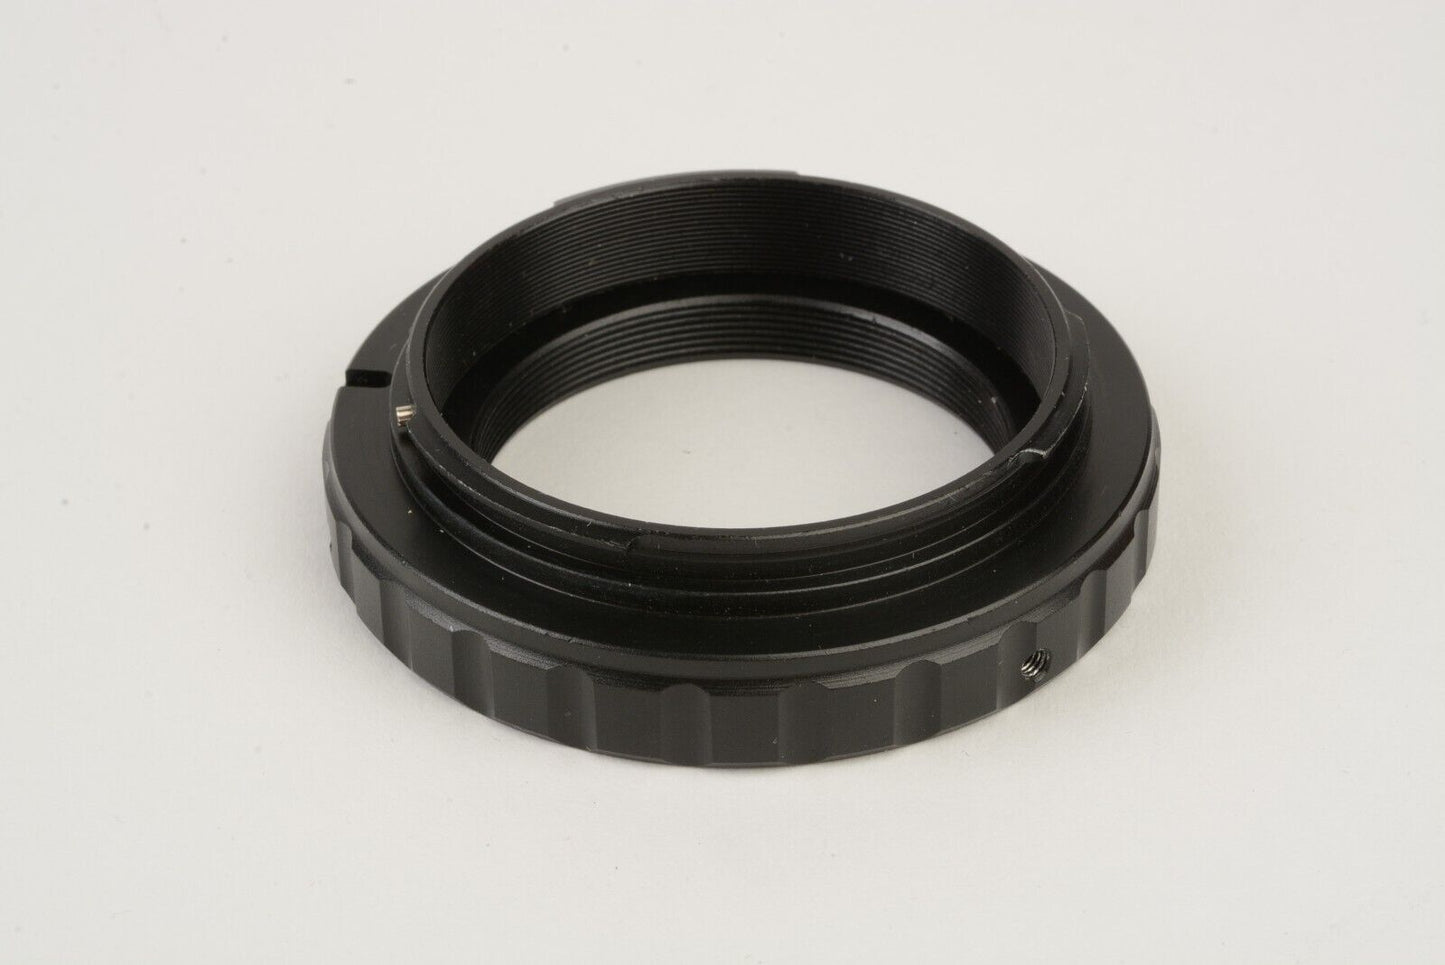 NIB ORION T MOUNT ADAPTER FOR CANON EOS LENSES